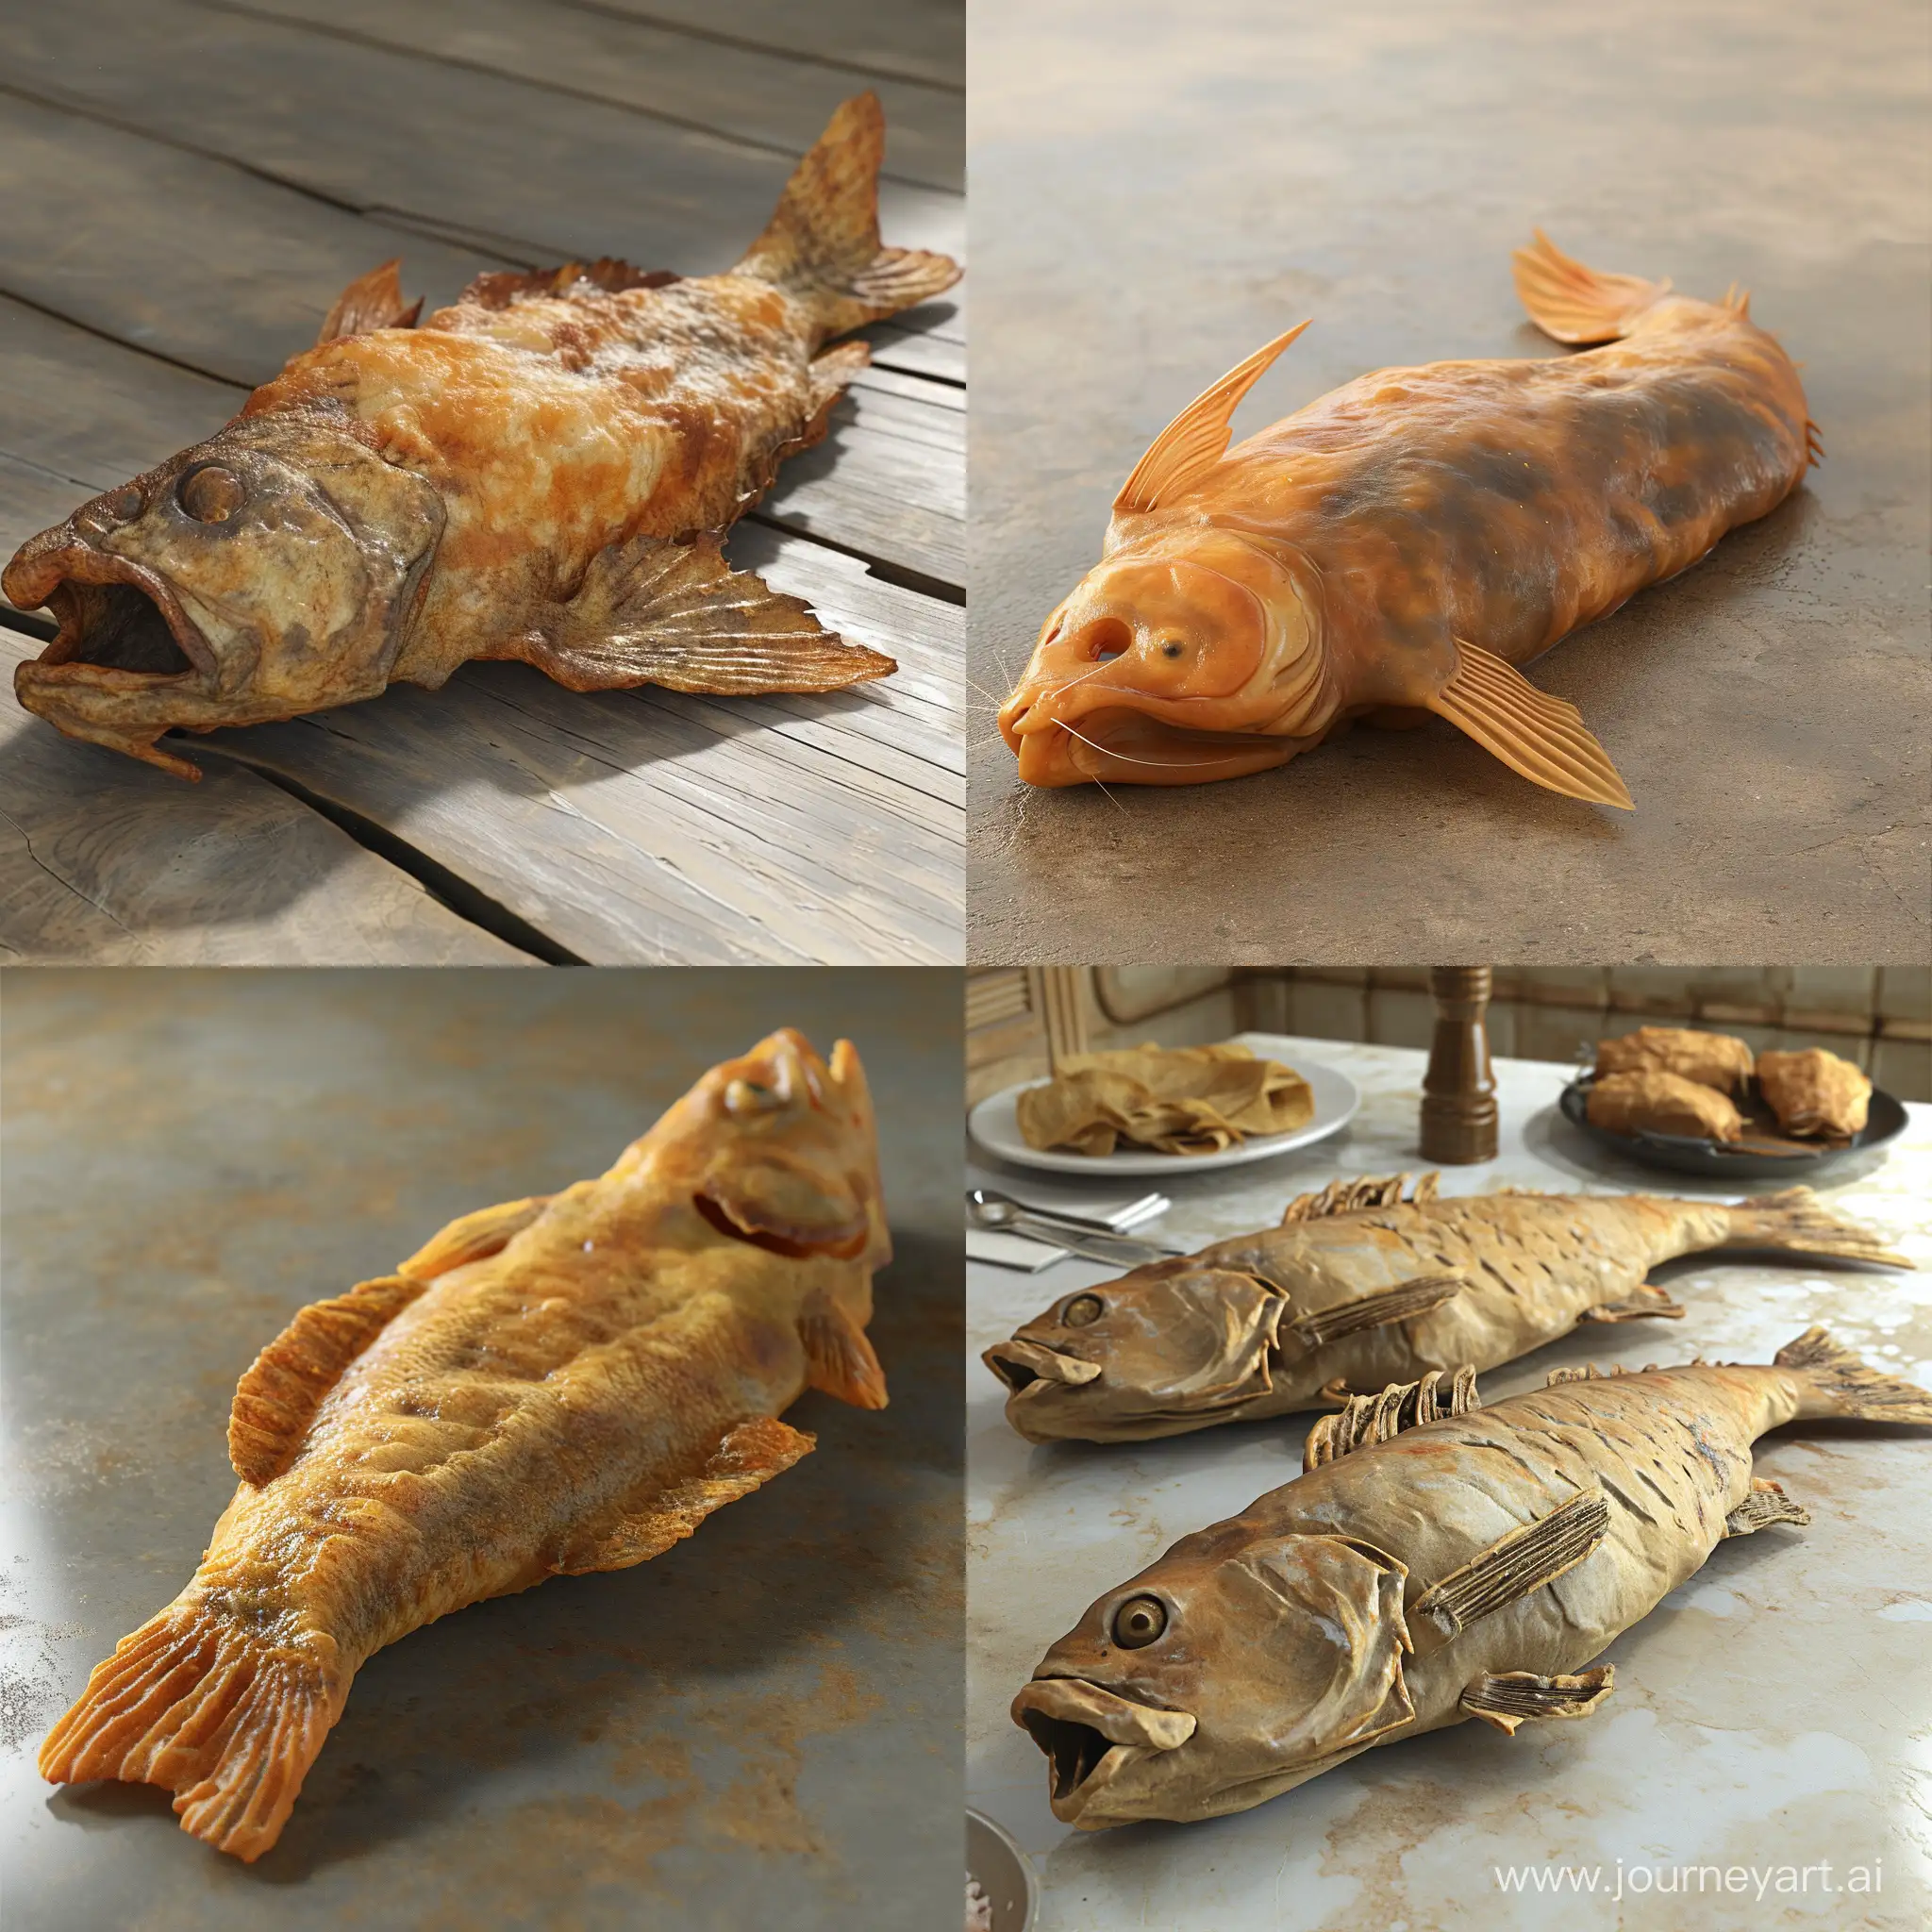 Delicious-Fried-Catfish-on-the-Table-3D-Animation